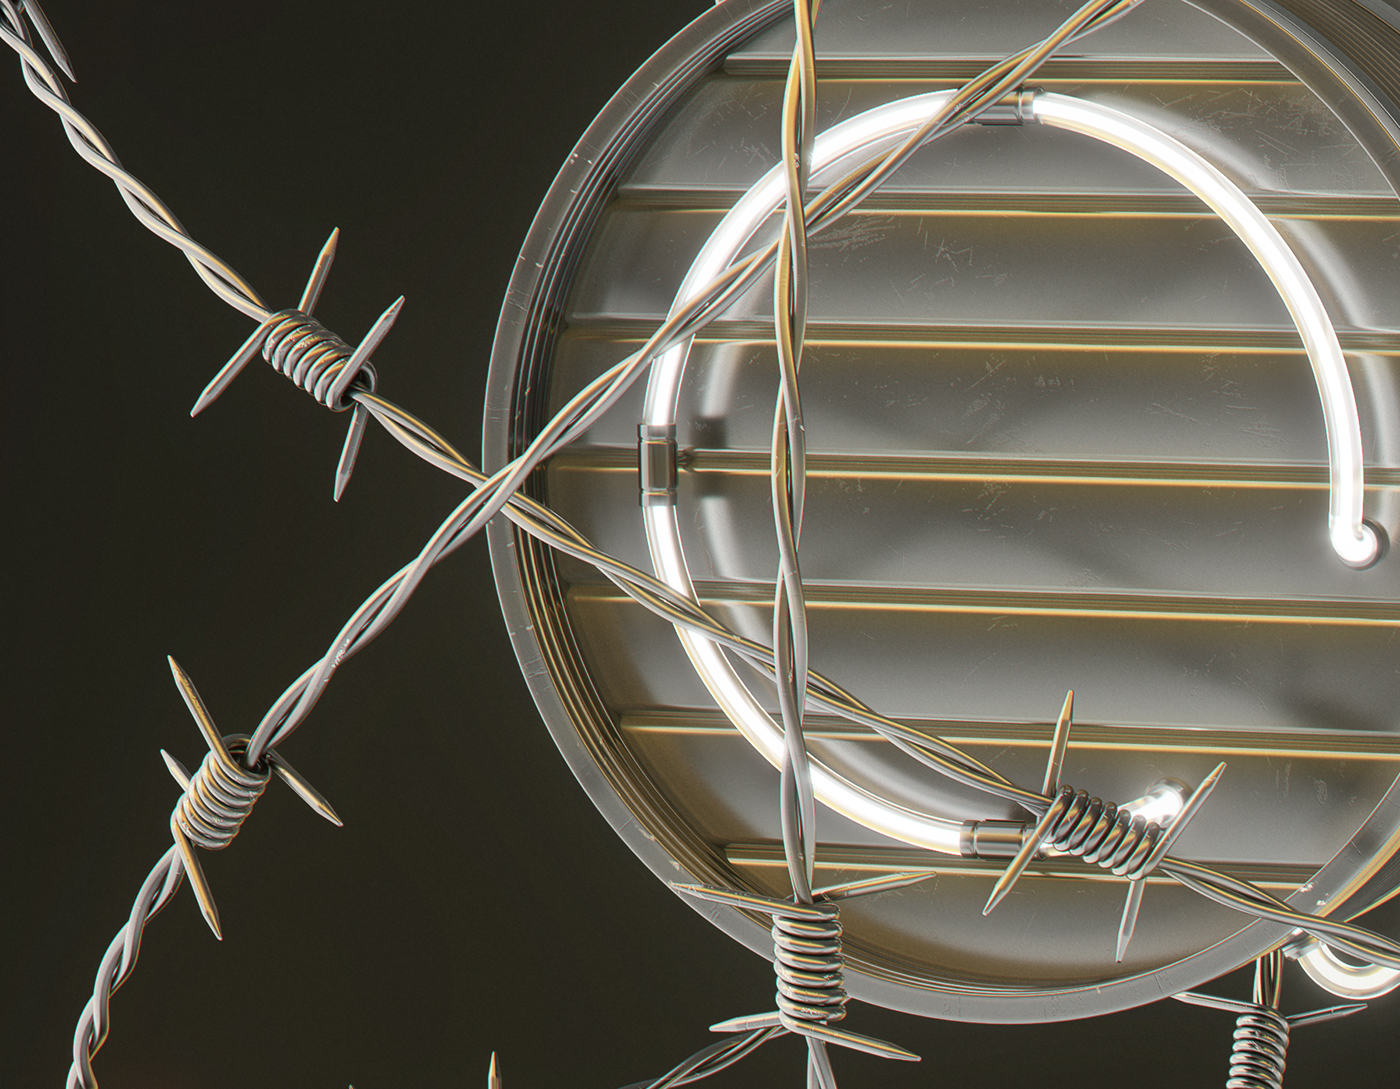 wire barbed fallout apocalyptic industrial 3D illustration CGI everydays punk radioactive